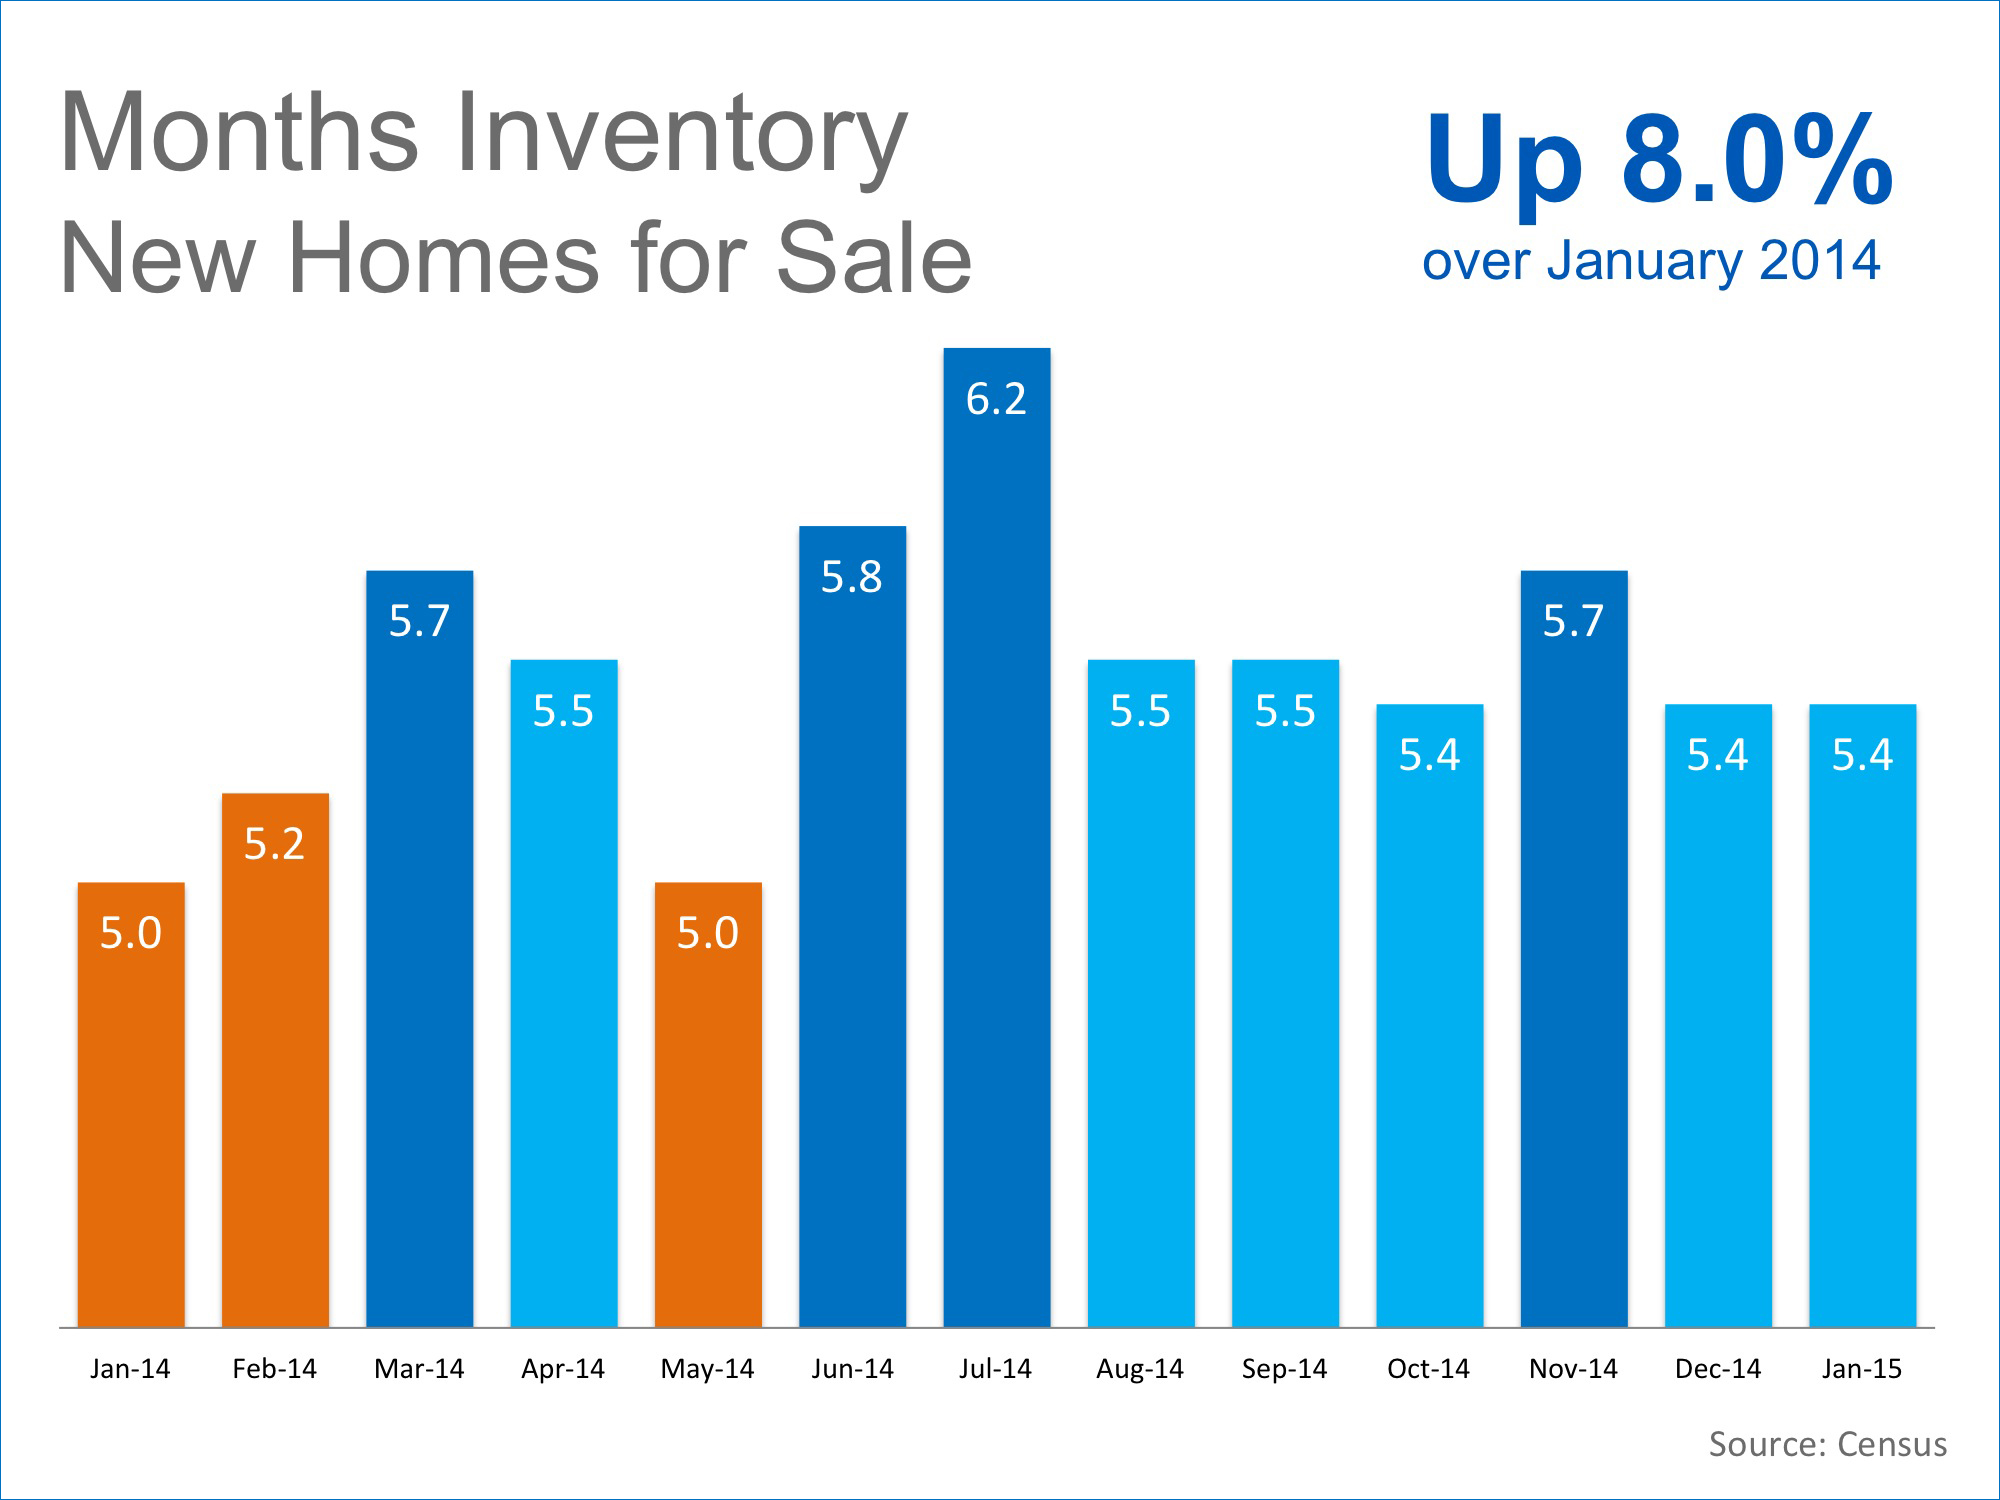 Months Inventory New Homes for Sale | Keeping Current Matters